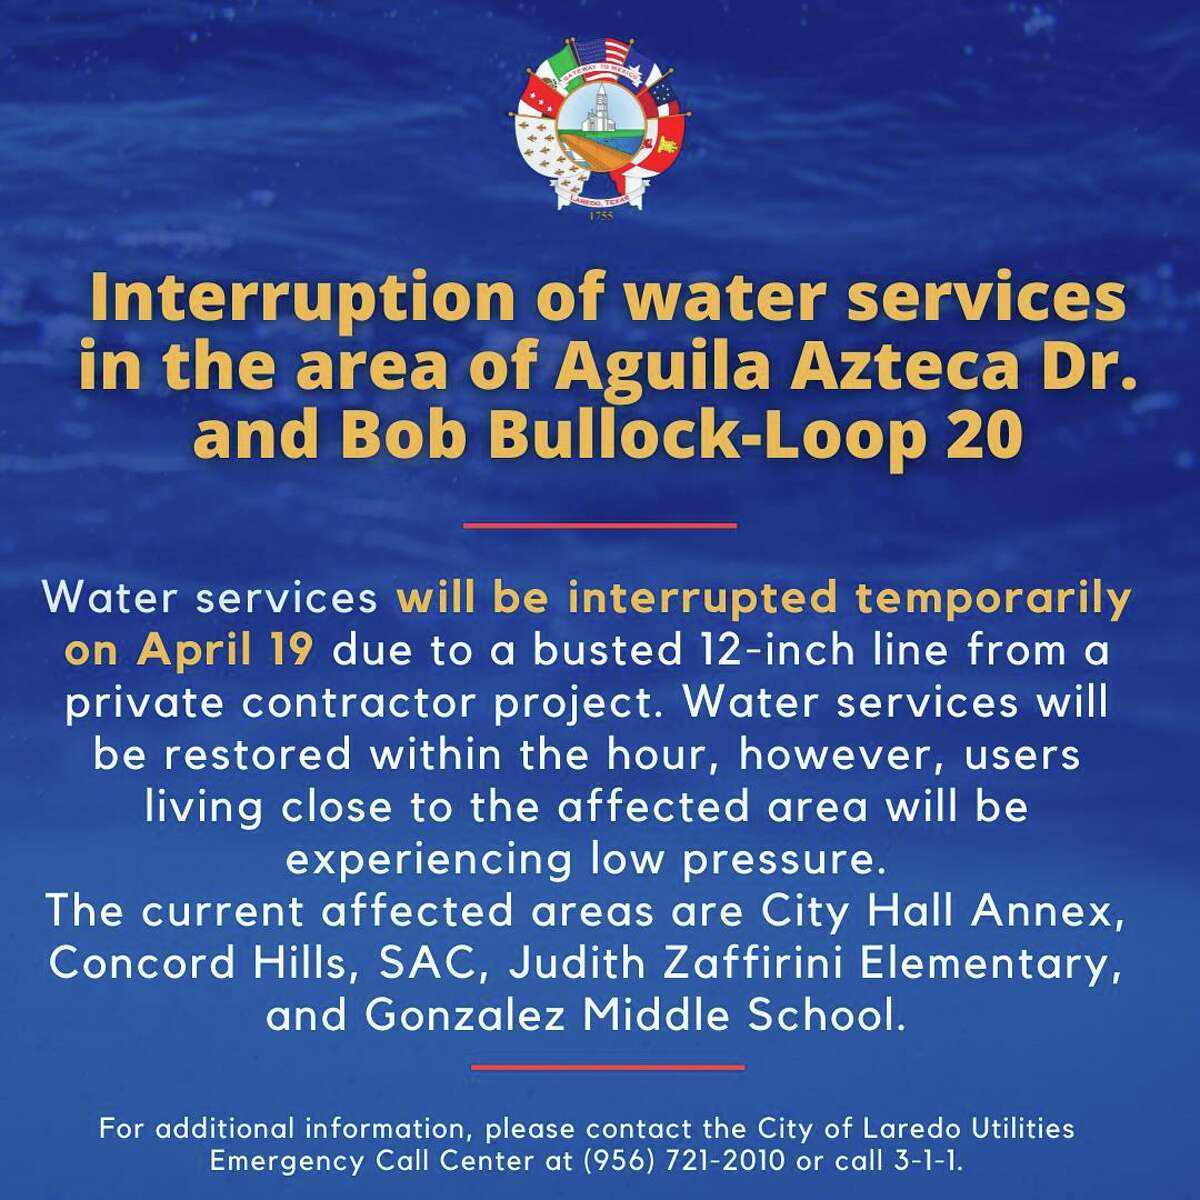 “Crews are isolating the area and water services will be restored within the hour. However, users close to the affected area will be experiencing low pressure.”